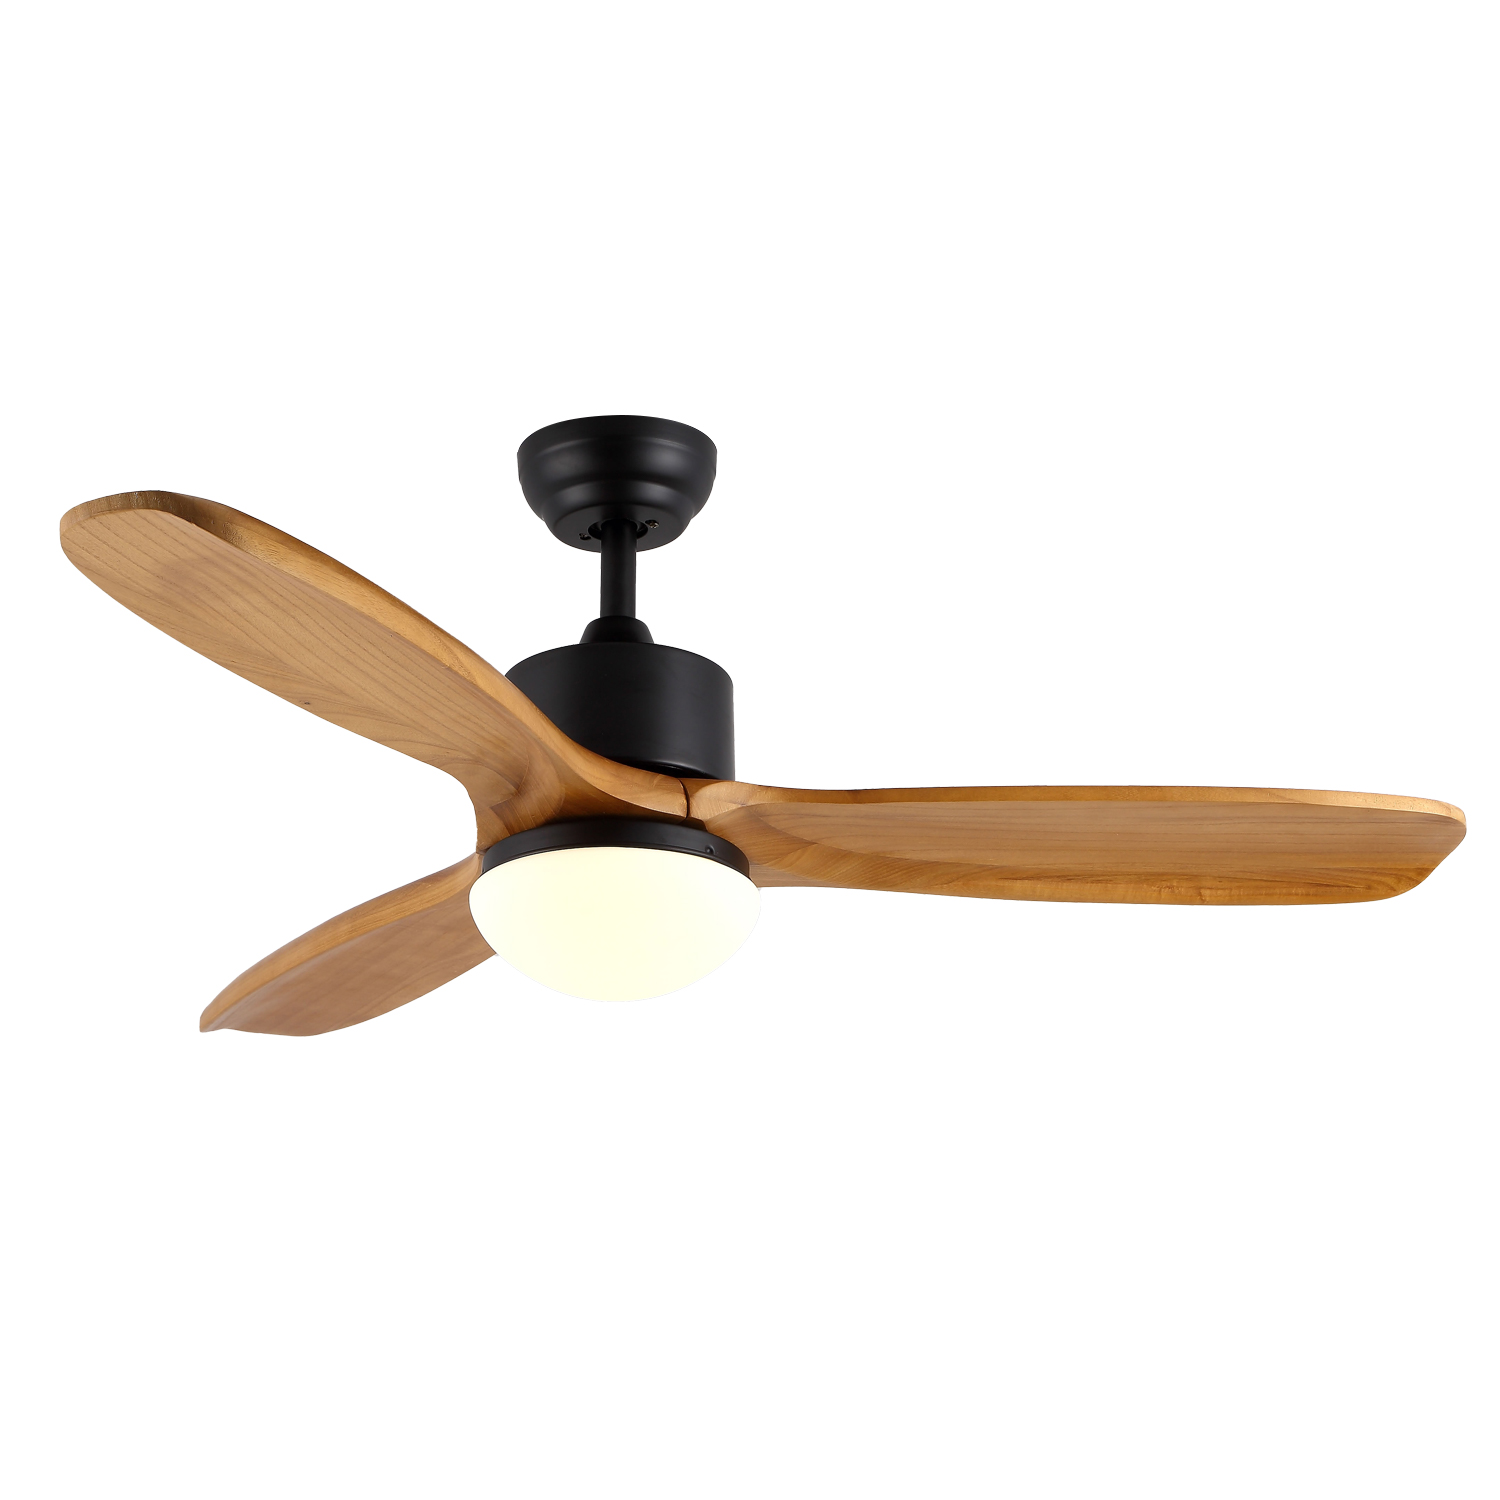 52 Inch Mdern Decorative 3 Wood Blades Dc Celling Fan with Remote